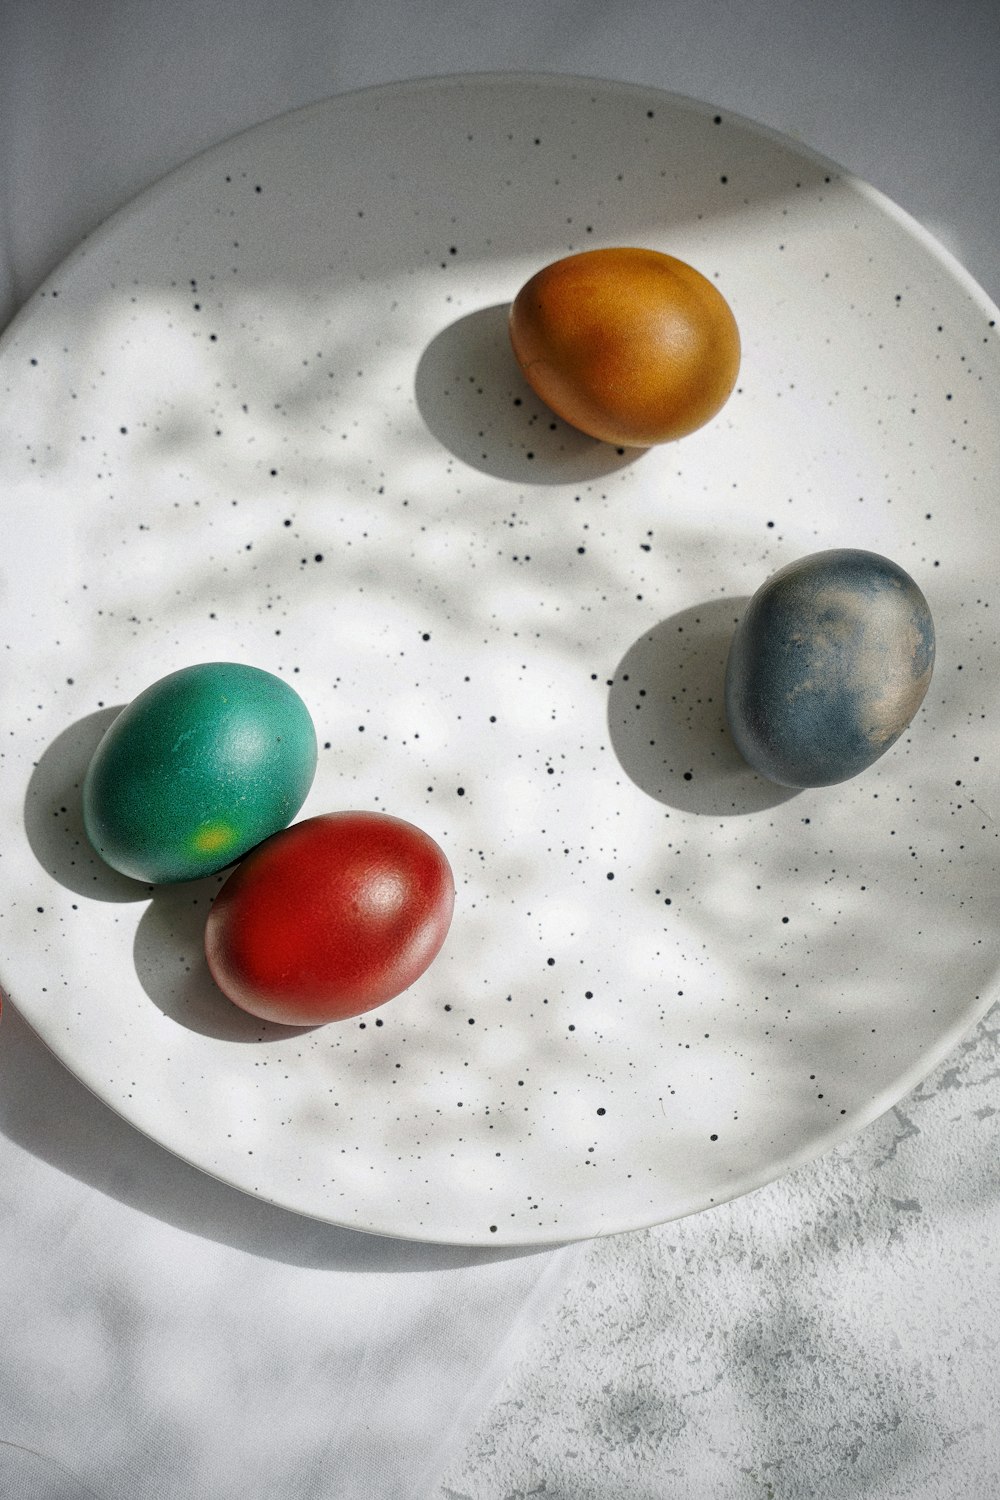 red green yellow and blue marble toys on white ceramic plate